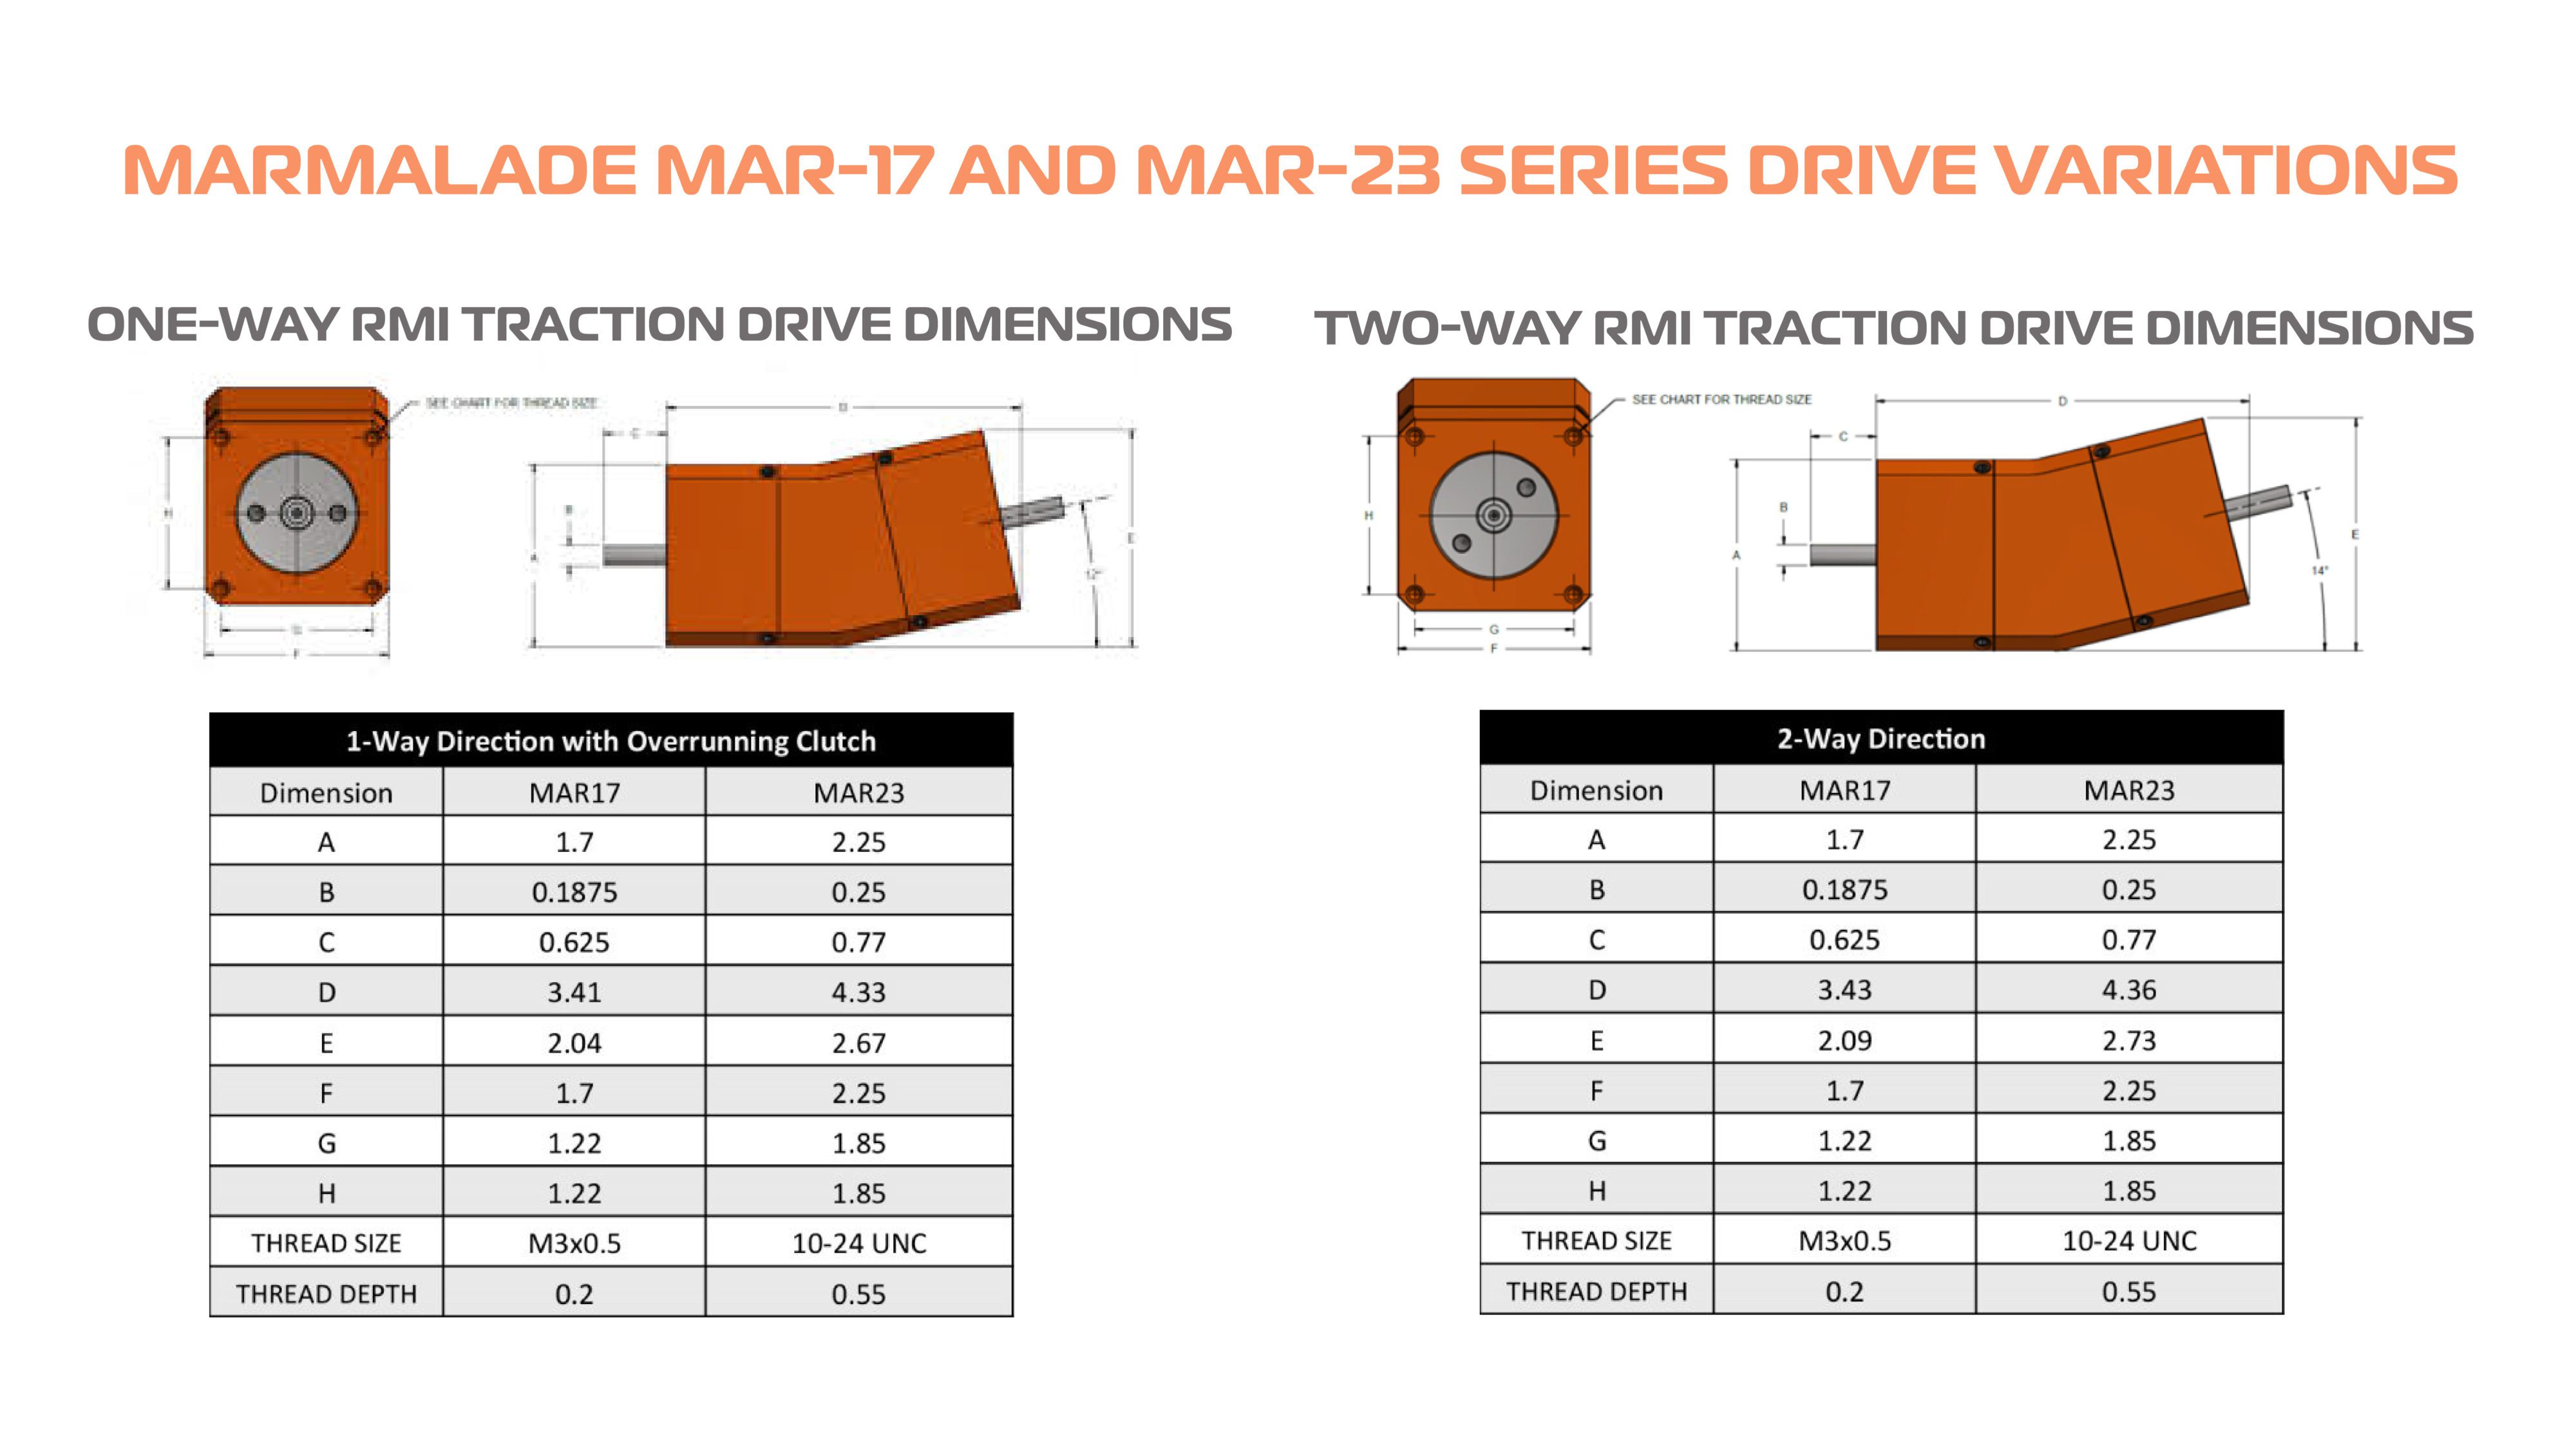 Marmalade MAR-17 and MAR-23 series drive variations and dimensions